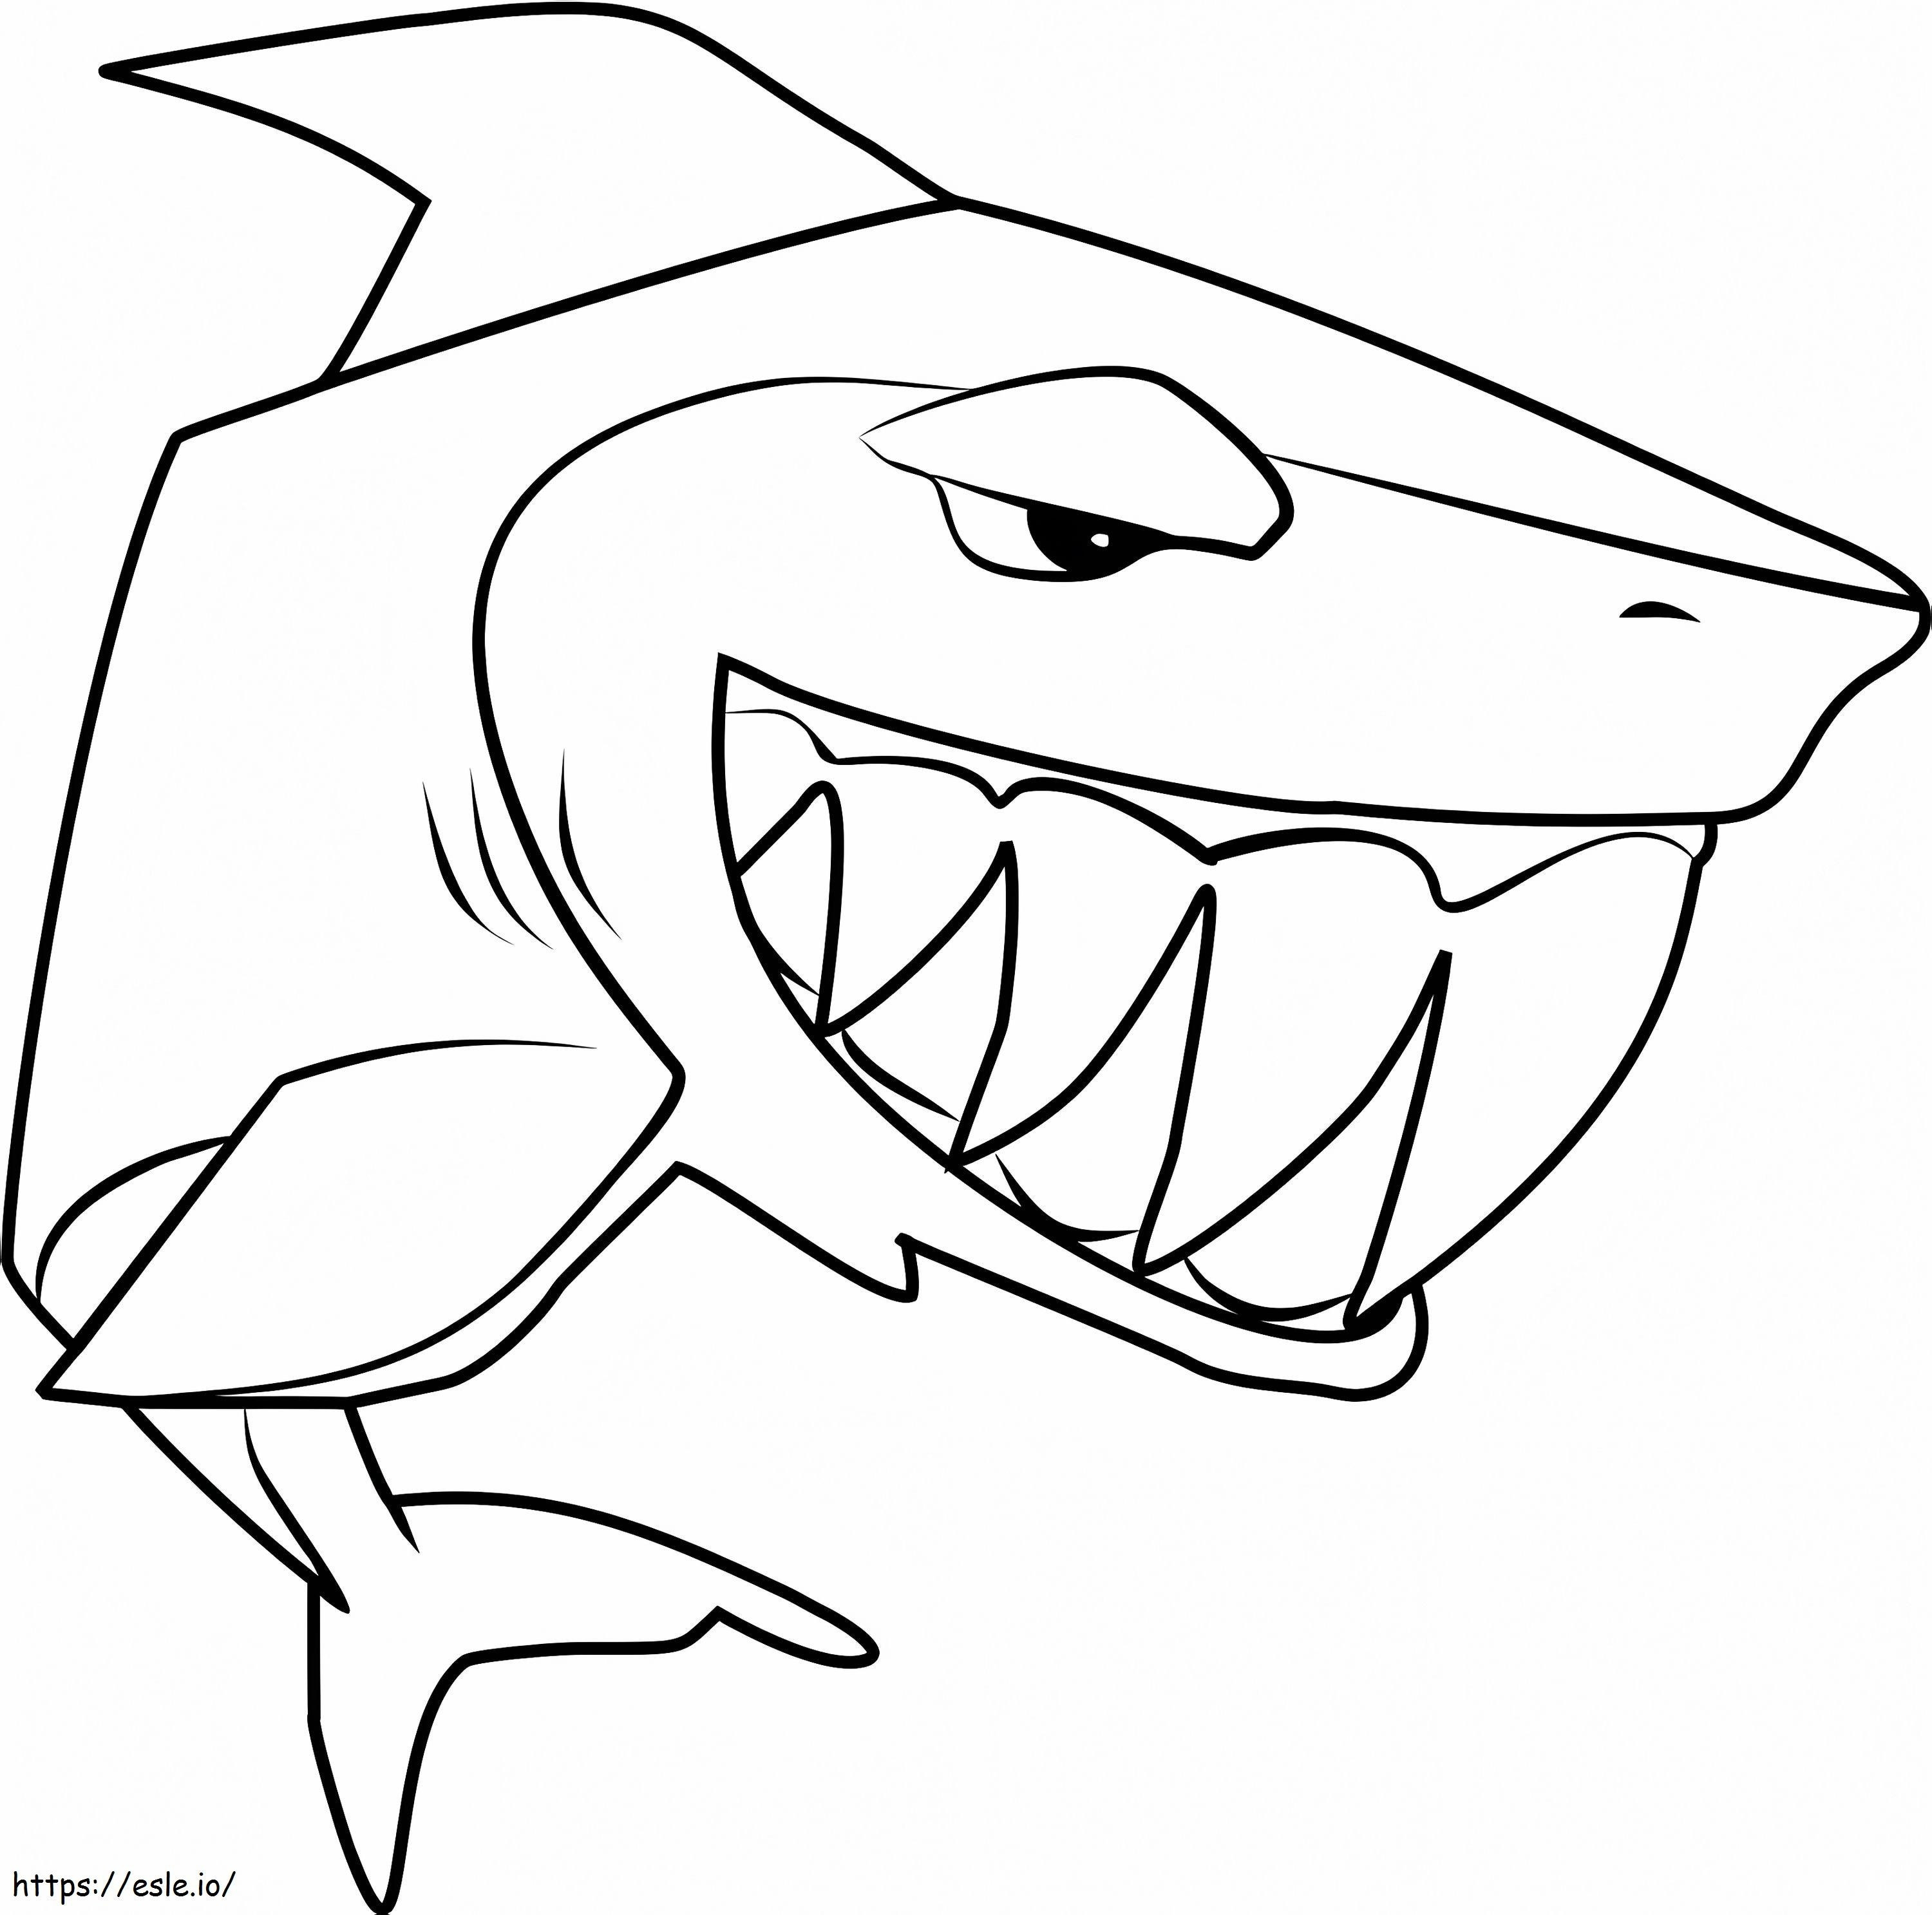 1529977143_58 coloring page